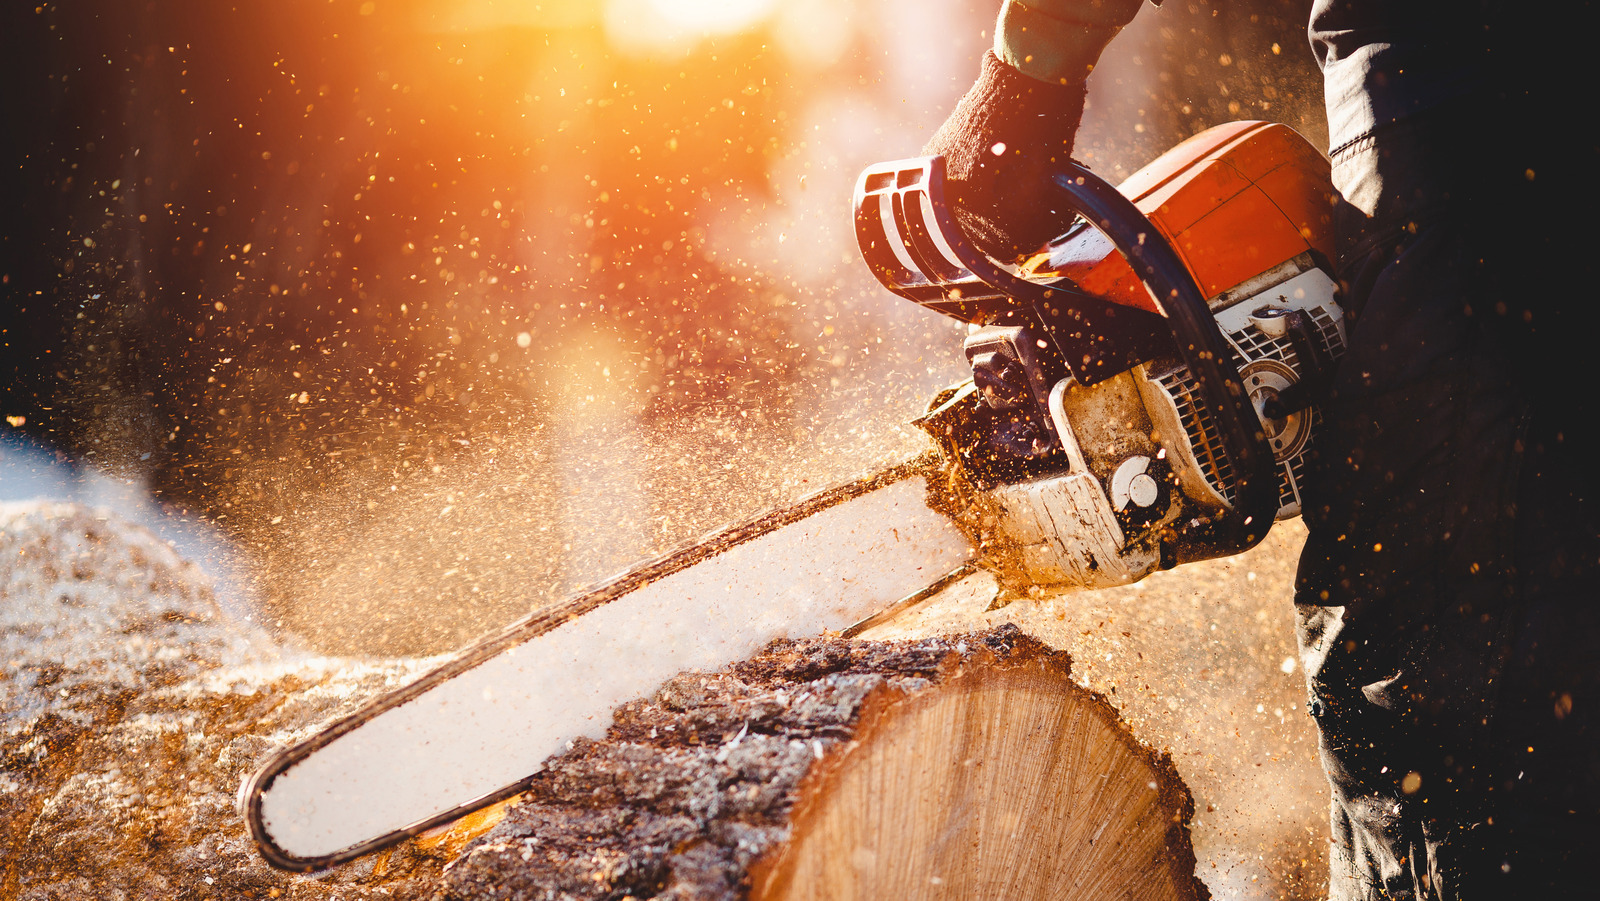 15 Types Of Saws That Can Cut Through Any Wood